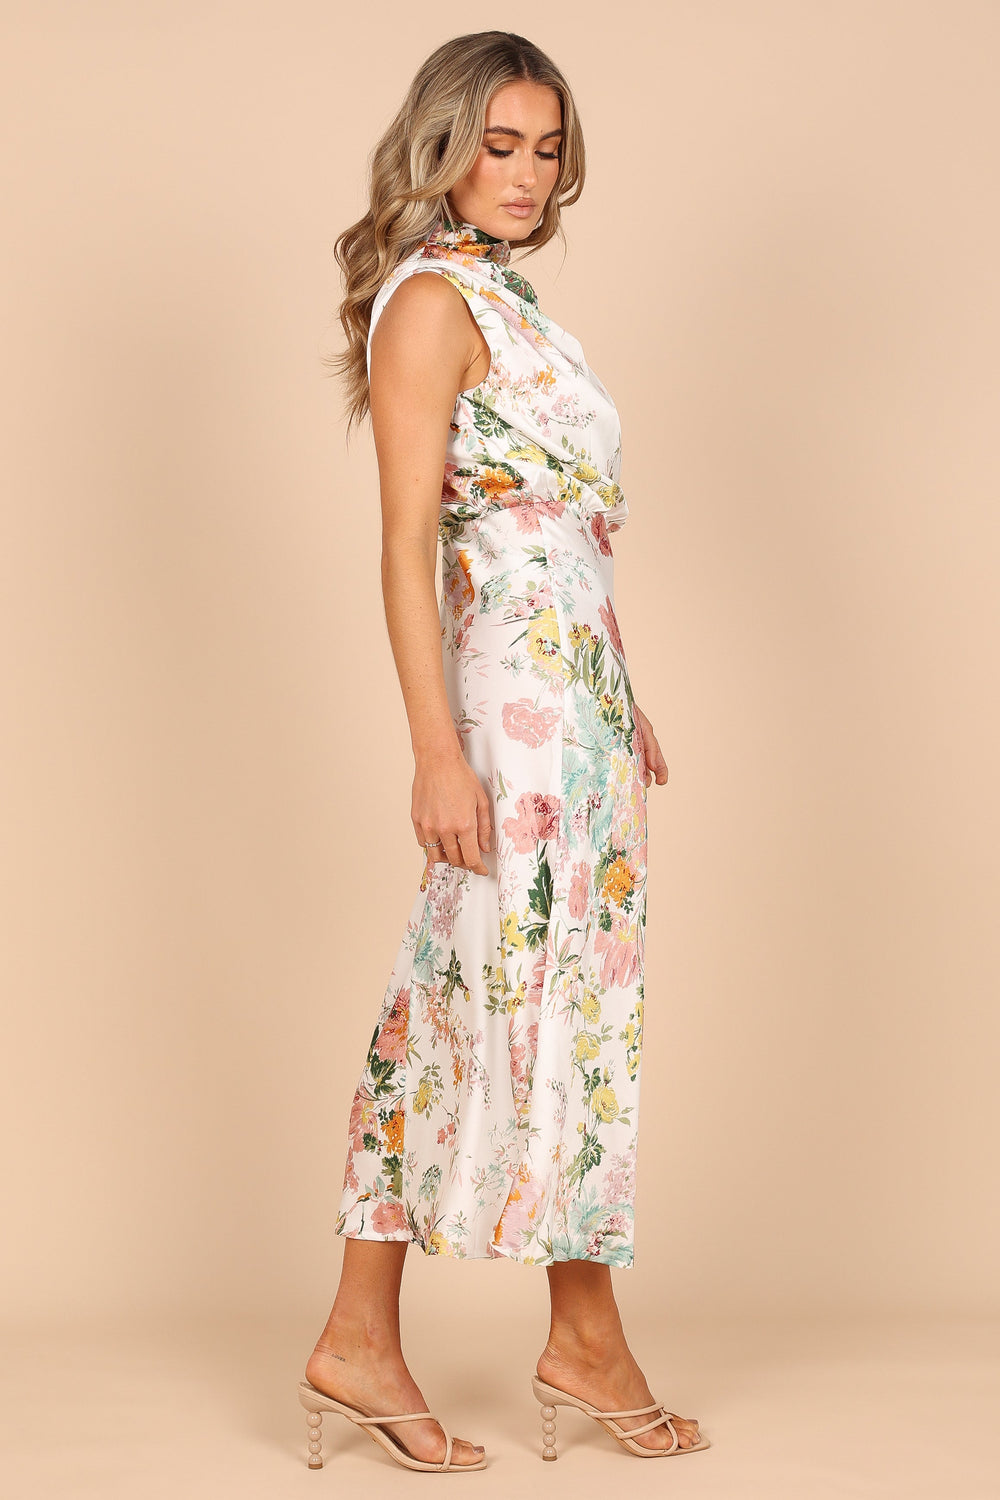 Petal and Pup USA DRESSES Anabelle Halter Neck Maxi Dress - White Floral